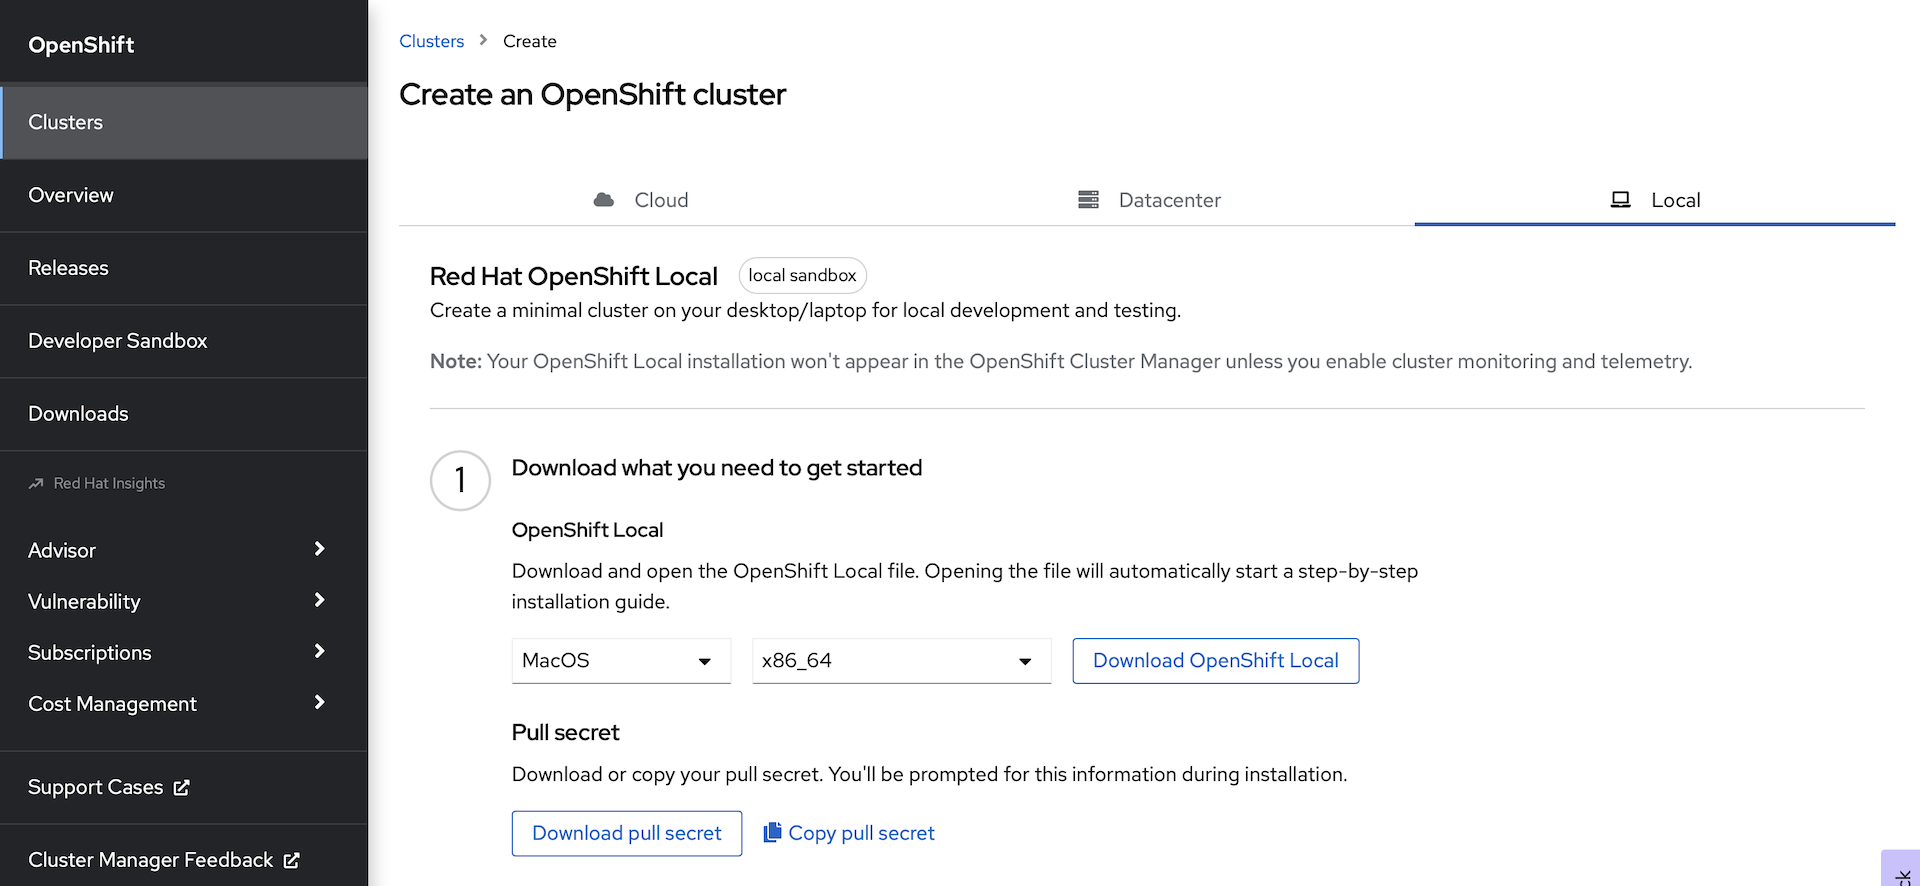 Download OpenShift Local